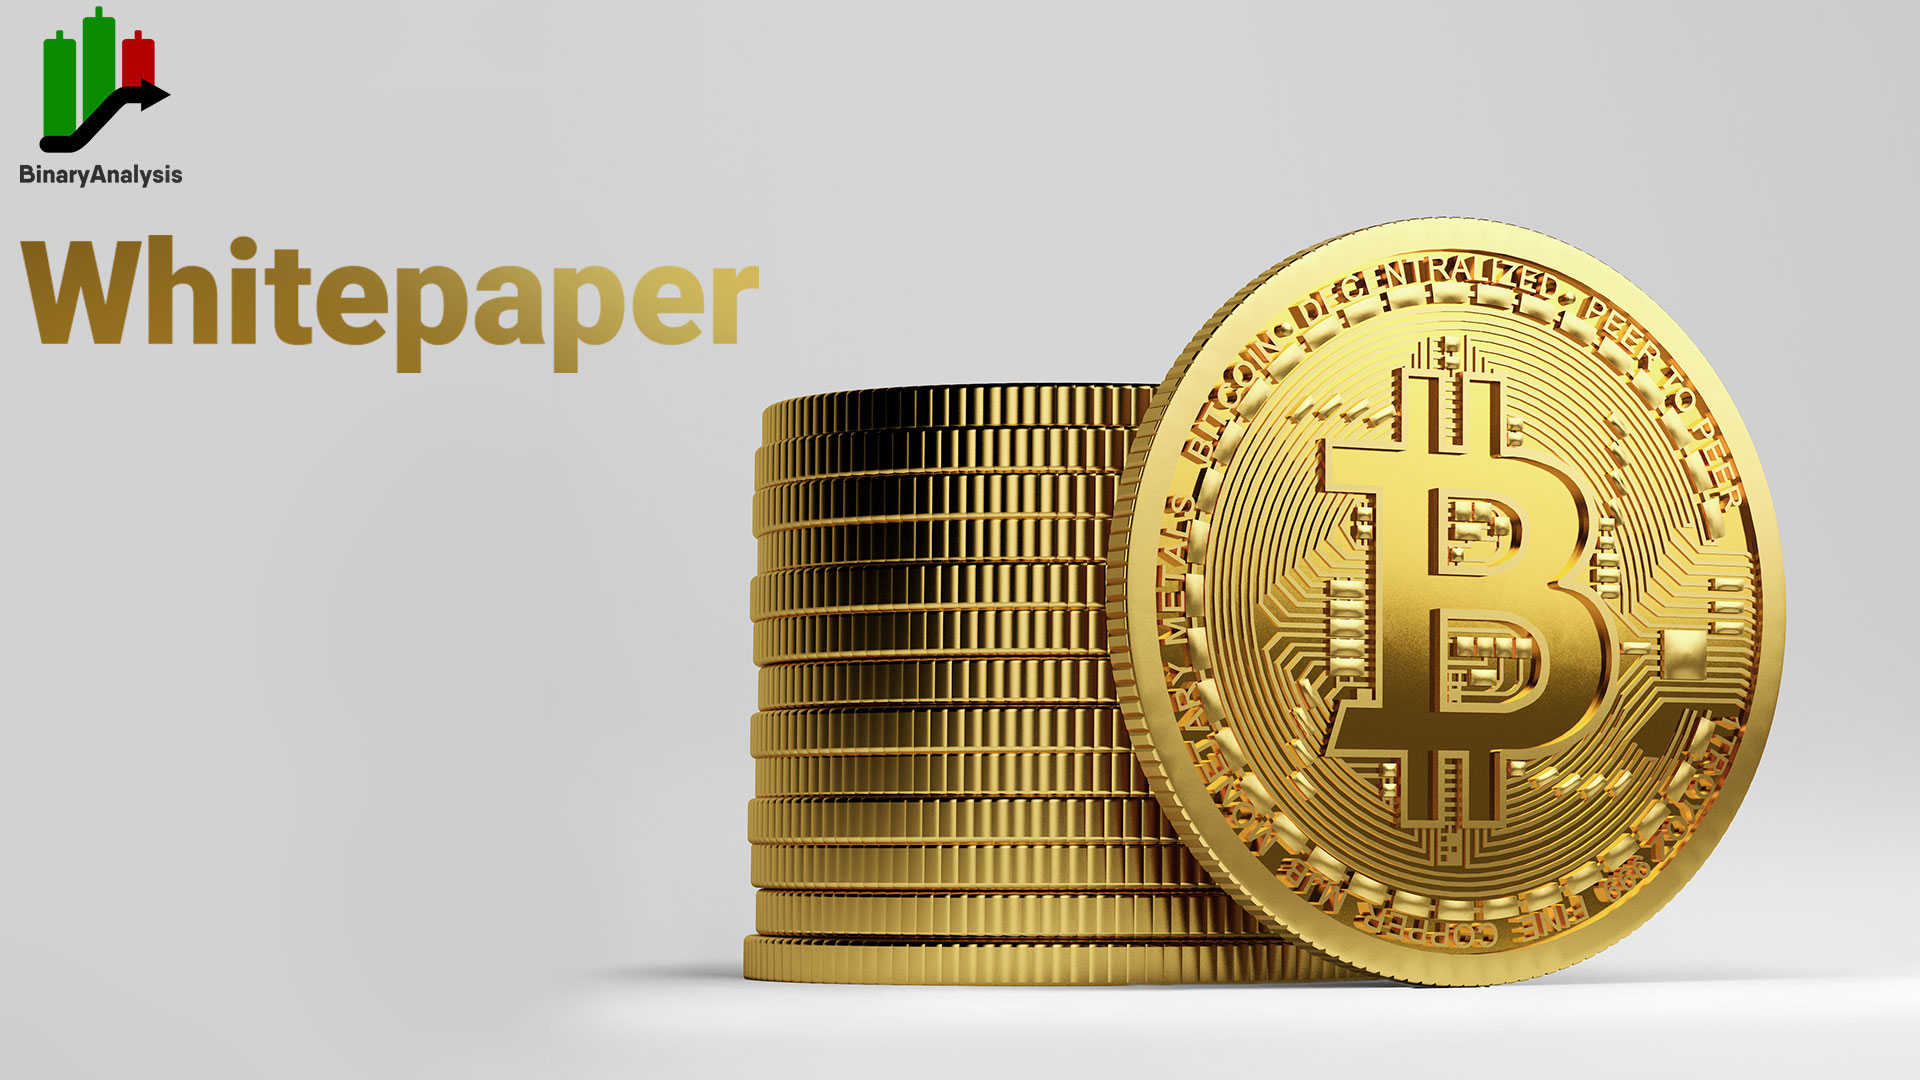  An Overview of Whitepaper: What to Analyze